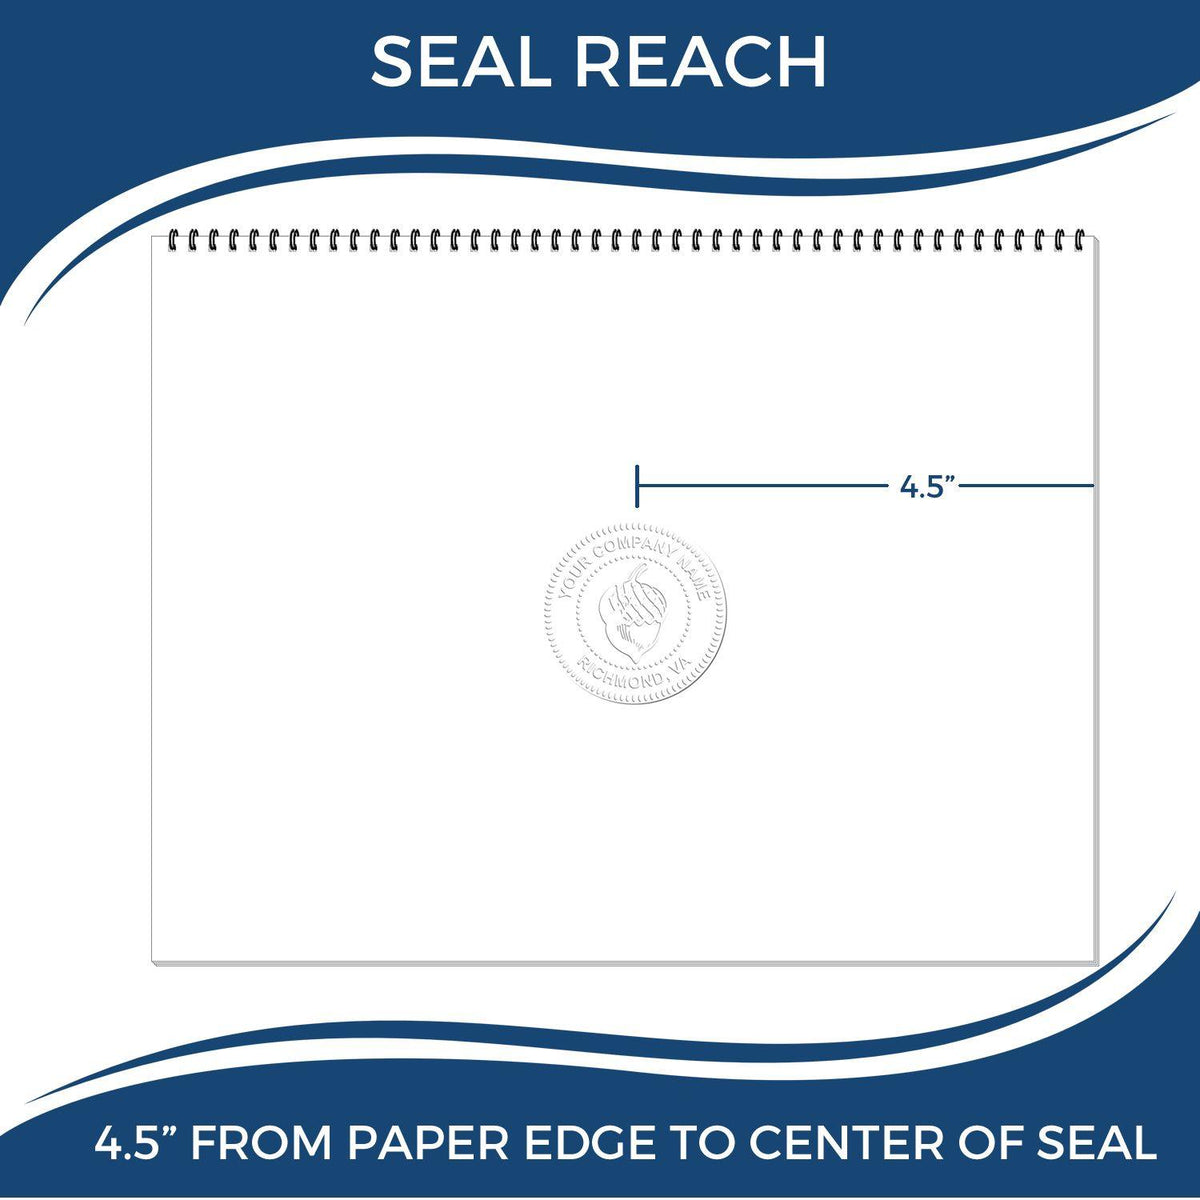 Forester Extended Long Reach Desk Seal Embosser - Engineer Seal Stamps - Embosser Type_Desk, Embosser Type_Extended Long Reach, Type of Use_Professional, Use_Heavy Duty, validate-product-description